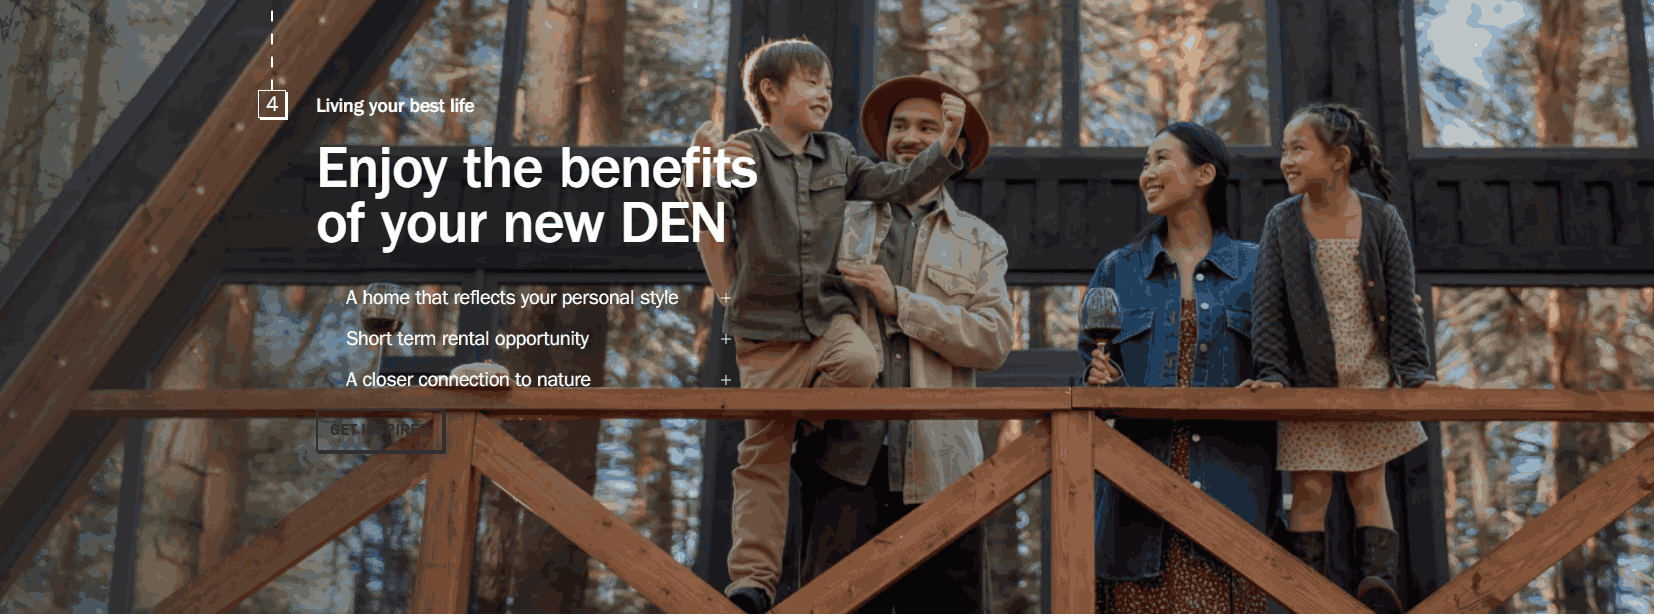 Den Close $3,000,000 at an Unknown Round of Funding